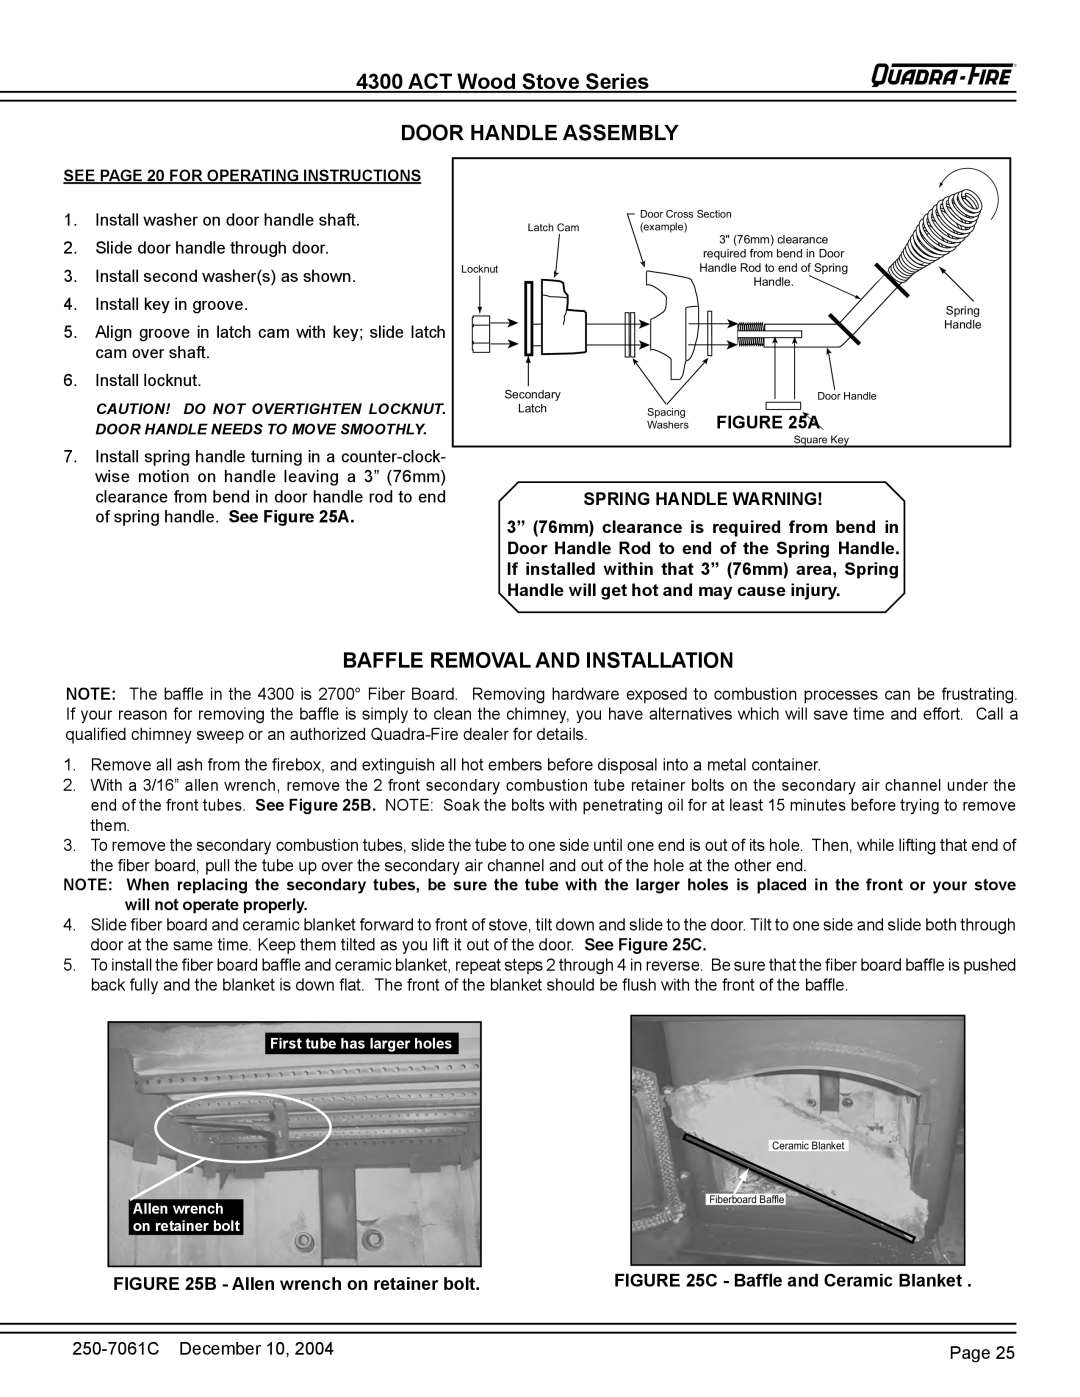 Quadra-Fire 4300 WOOD STOVE SERIES ACT Wood Stove Series DOOR HANDLE ASSEMBLY, Baffle Removal And Installation, Washers A 